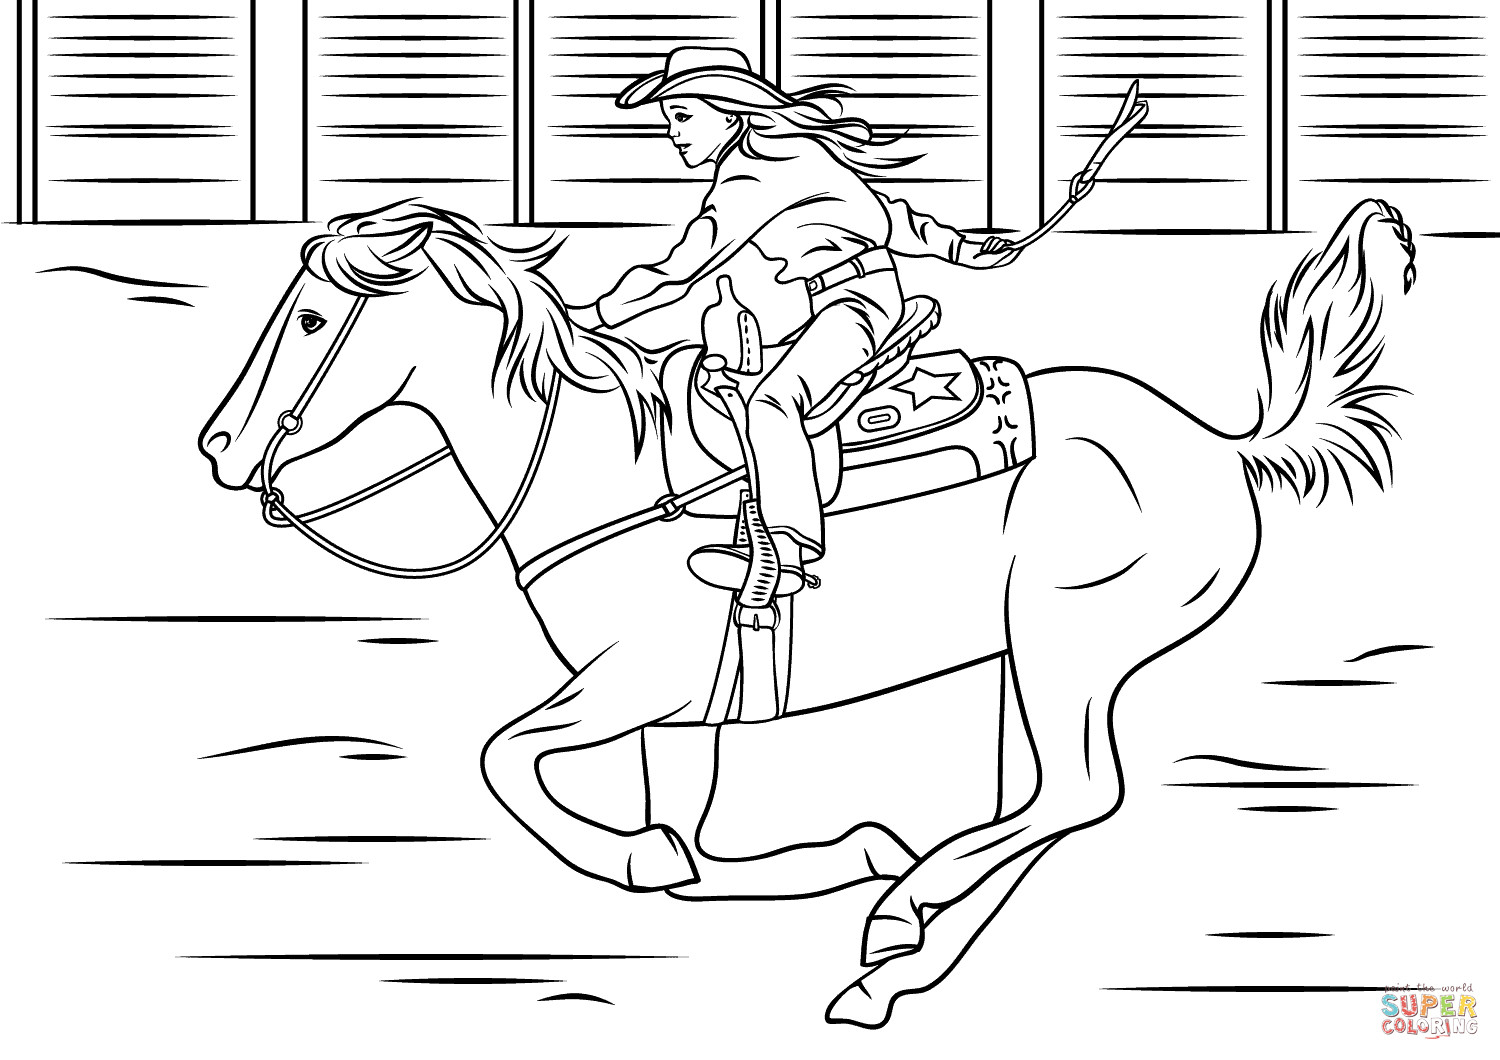 Bull Riding Coloring Pages Great Horse Racing Coloring Pages Bull Riding Beautiful Nice Horses